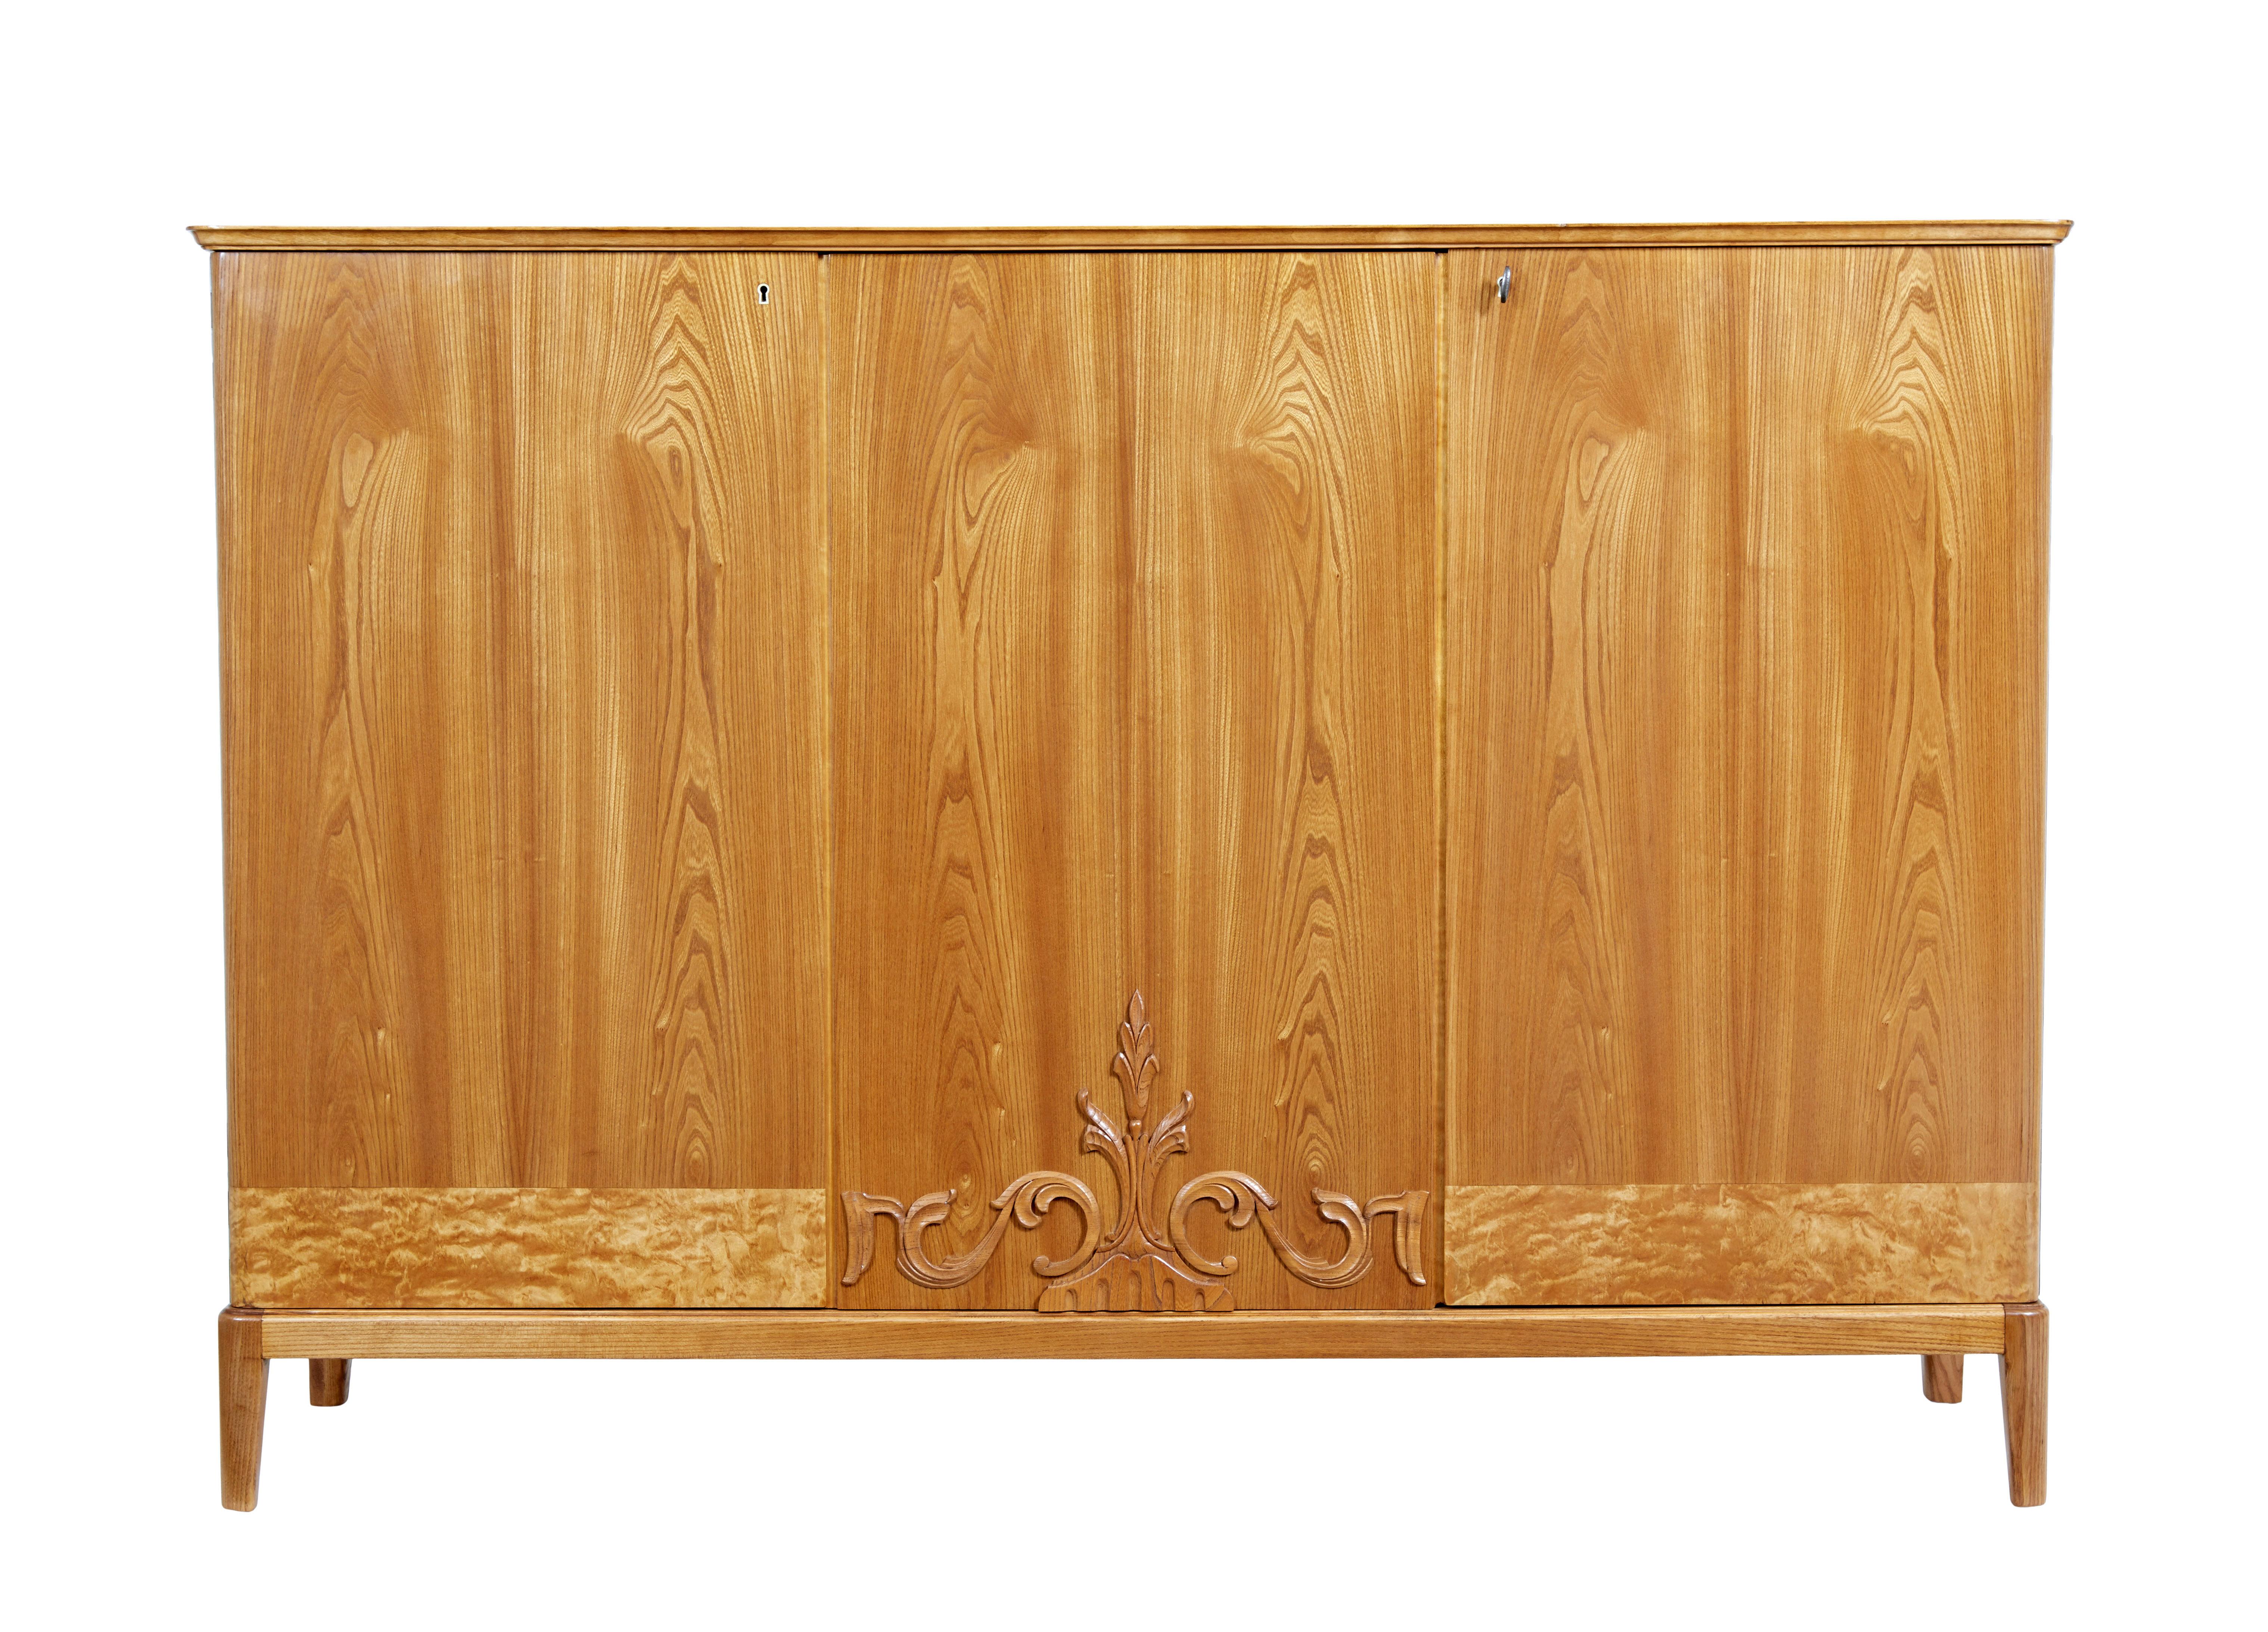 Mid 20th century Fine quality Scandinavian elm sideboard in the art deco taste.  Providing double door and single door storage space.  Double doors open to reveal 2 shelves either side of a central partition.  3 fitted drawer slides and a further